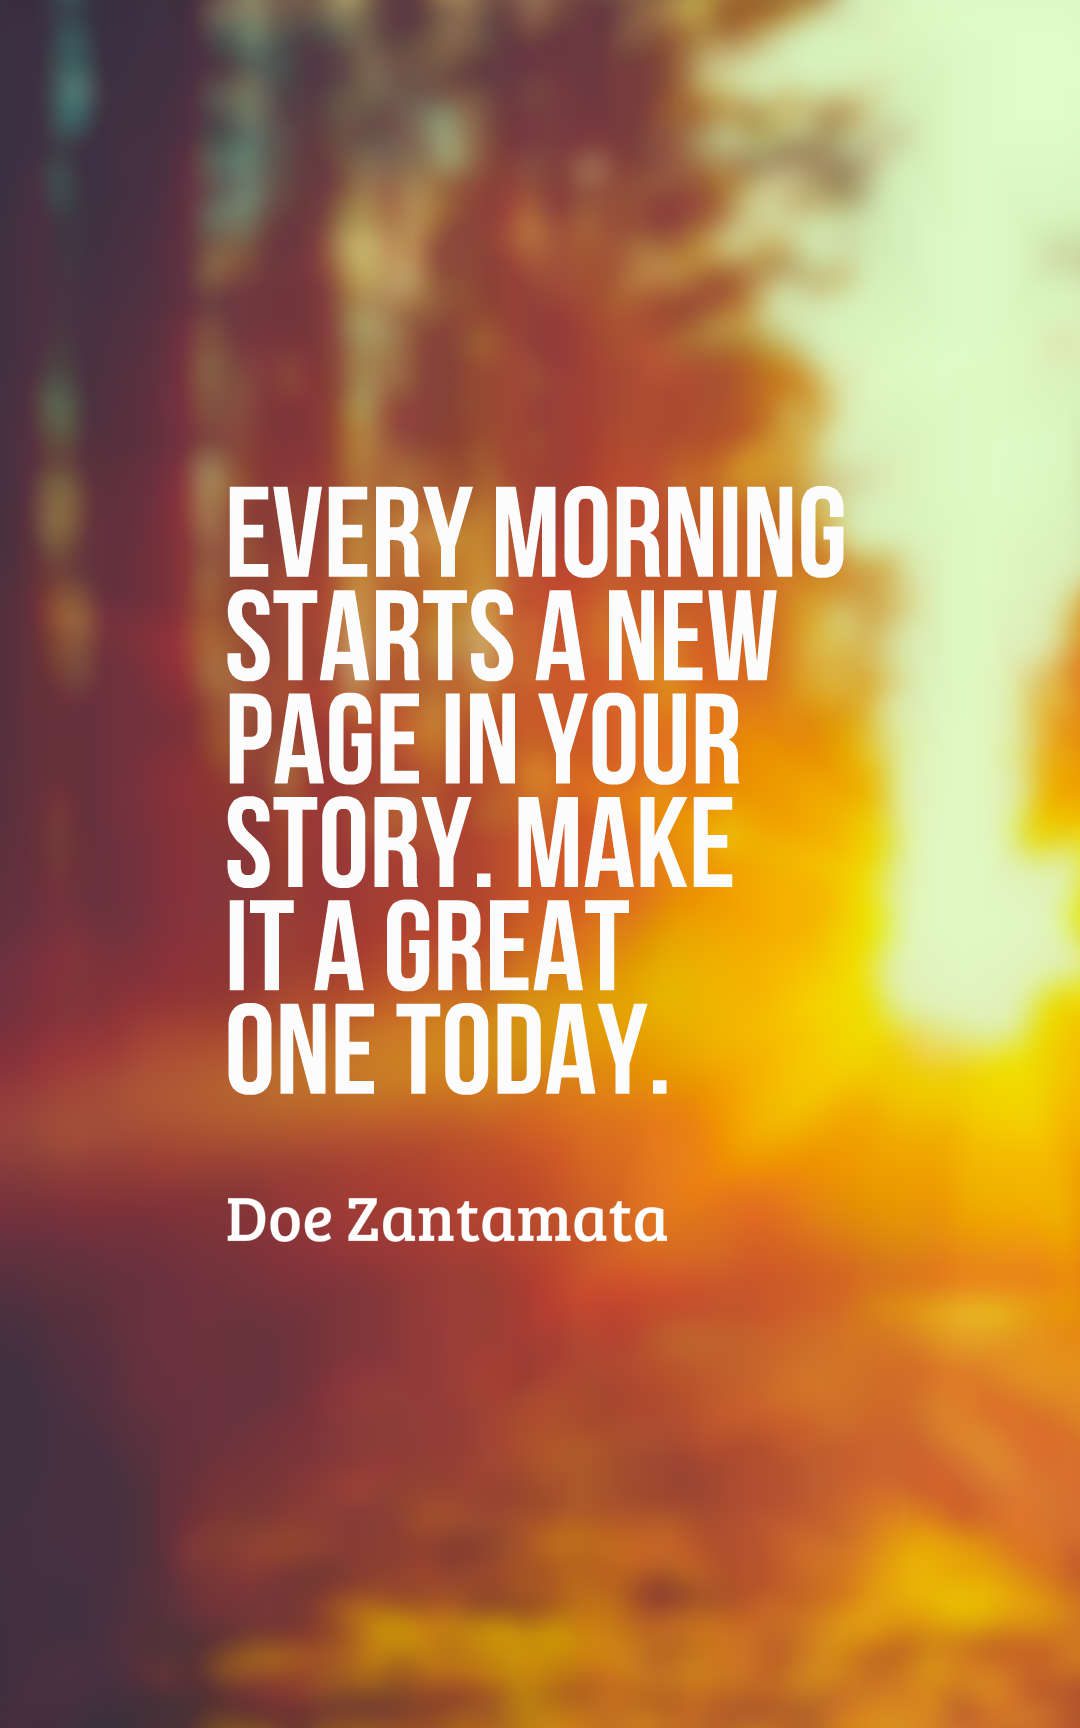 Every morning starts a new page in your story. Make it a great one today.